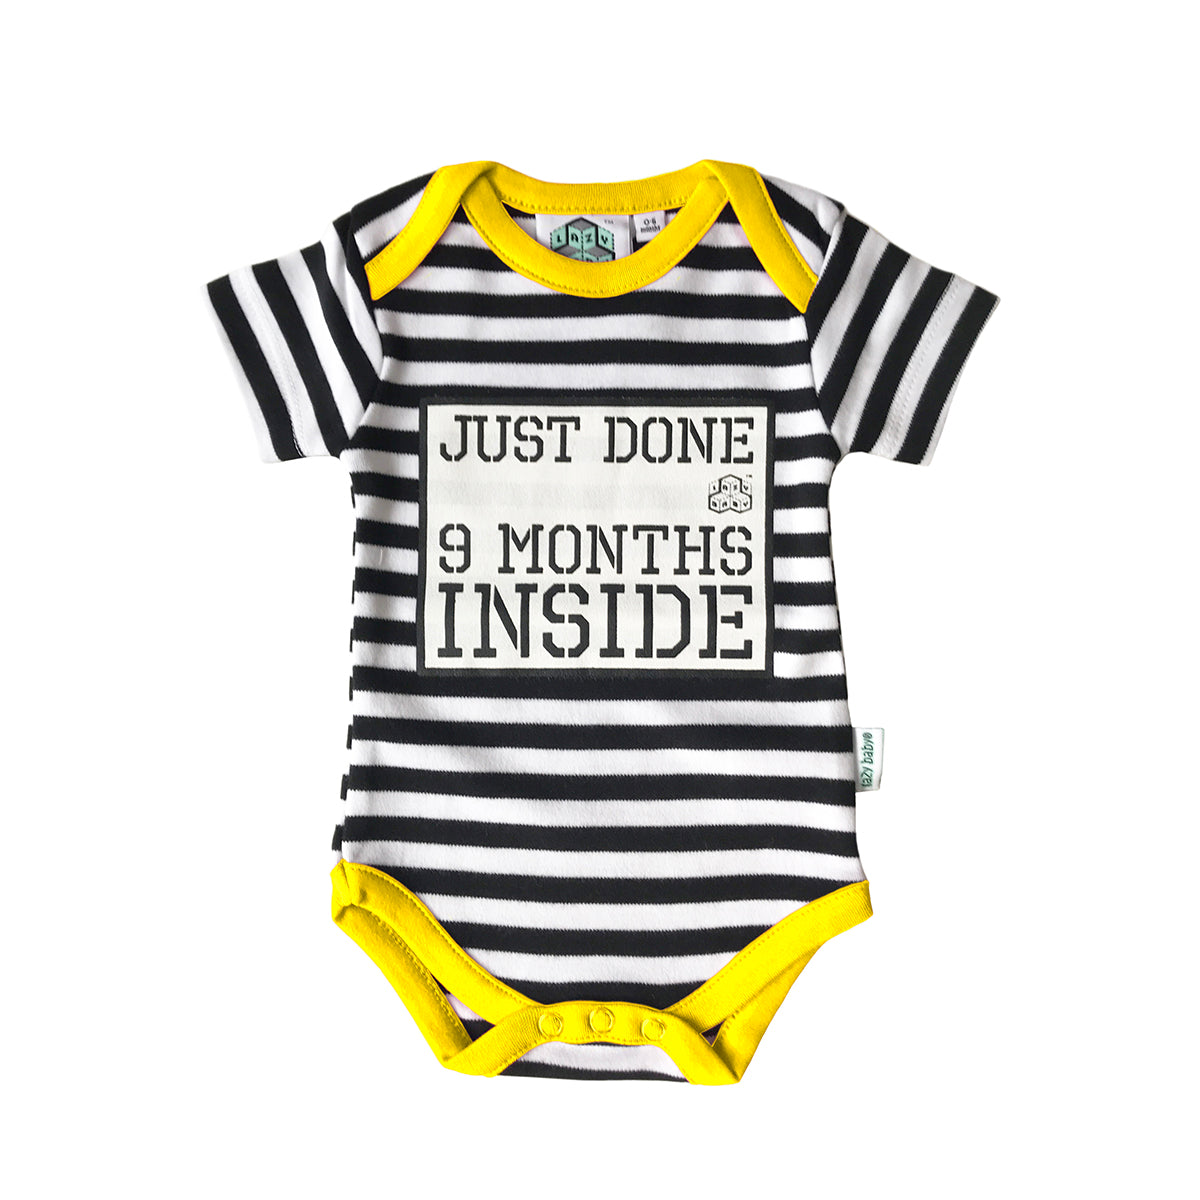 New Born Gift -Just Done 9 Months Inside® Vest - Pregnancy Reveal - Coming Home Outfit - Baby Announcement